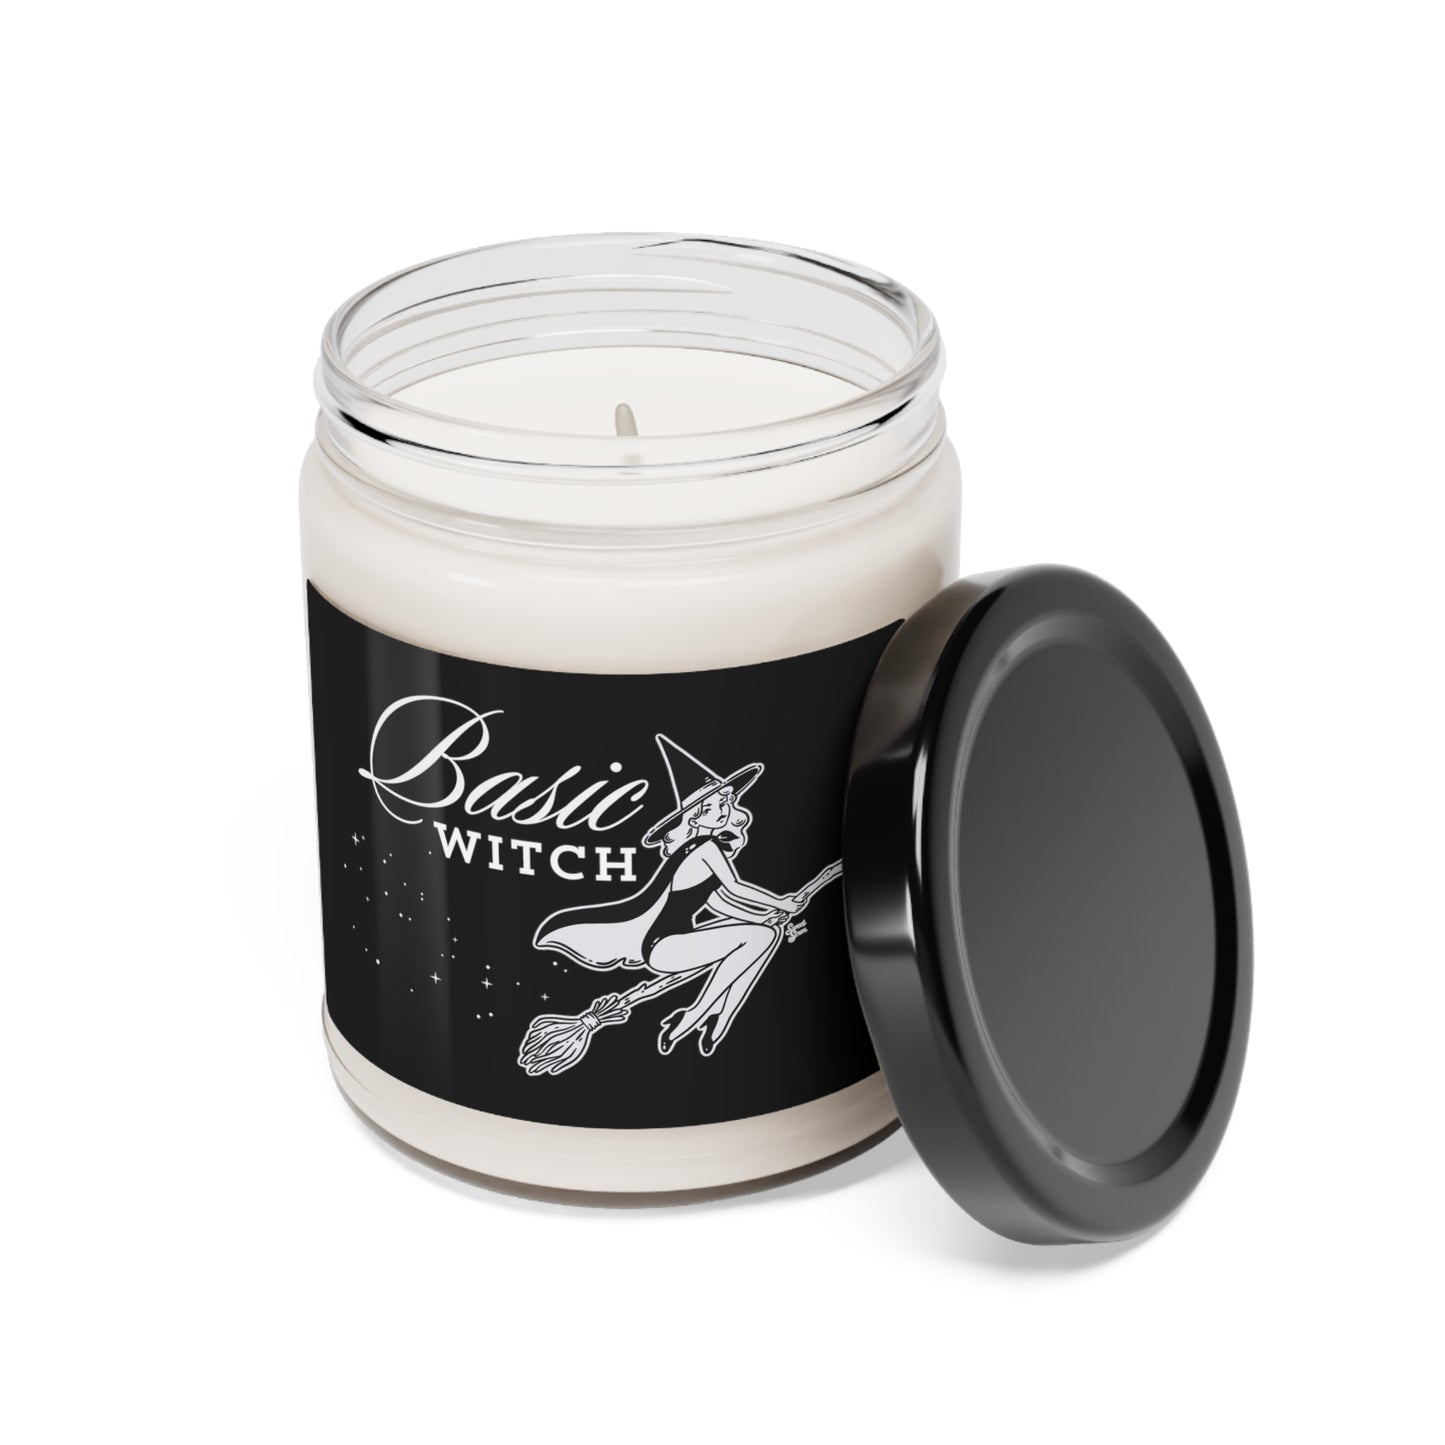 Basic Witch - Scented Soy Candle, 9oz